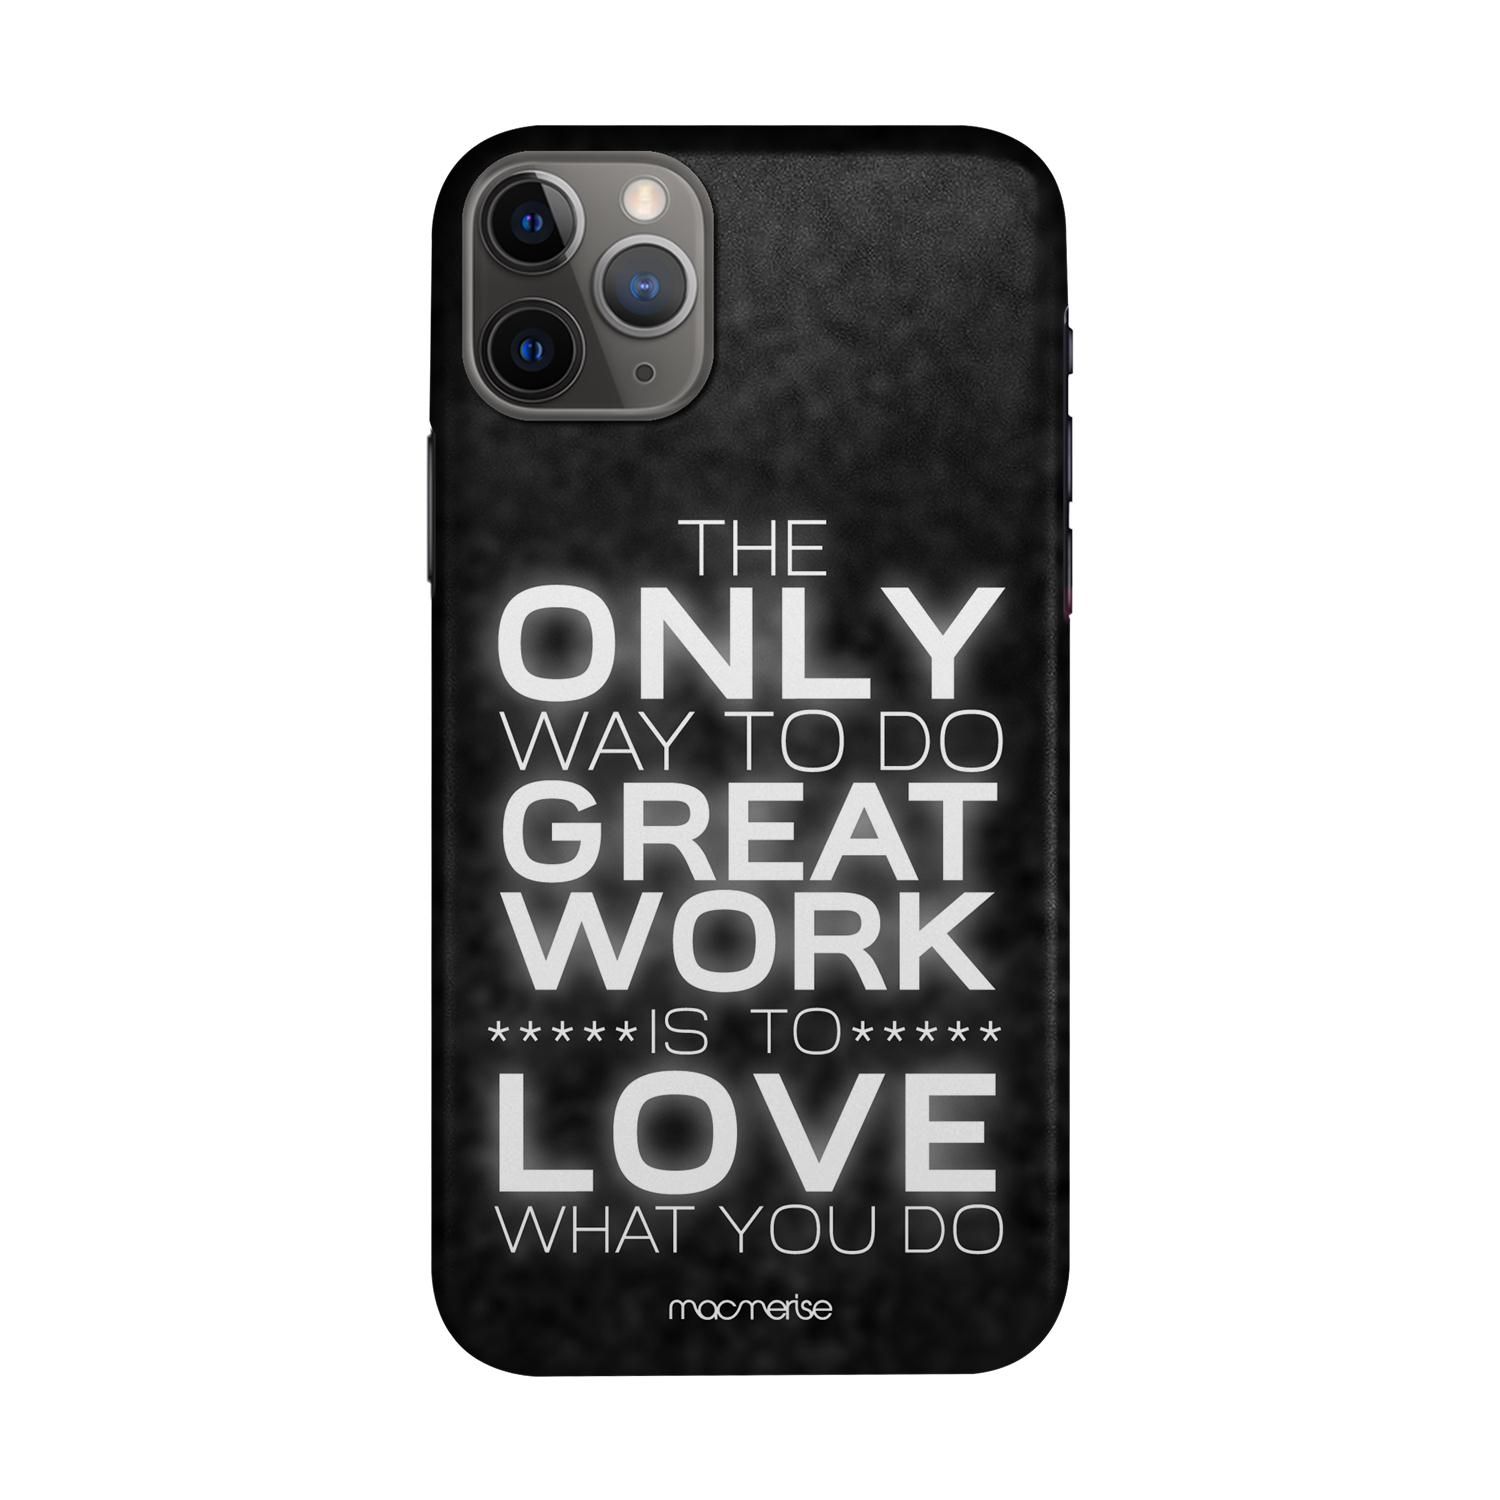 Buy Love What You Do - Sleek Phone Case for iPhone 11 Pro Max Online